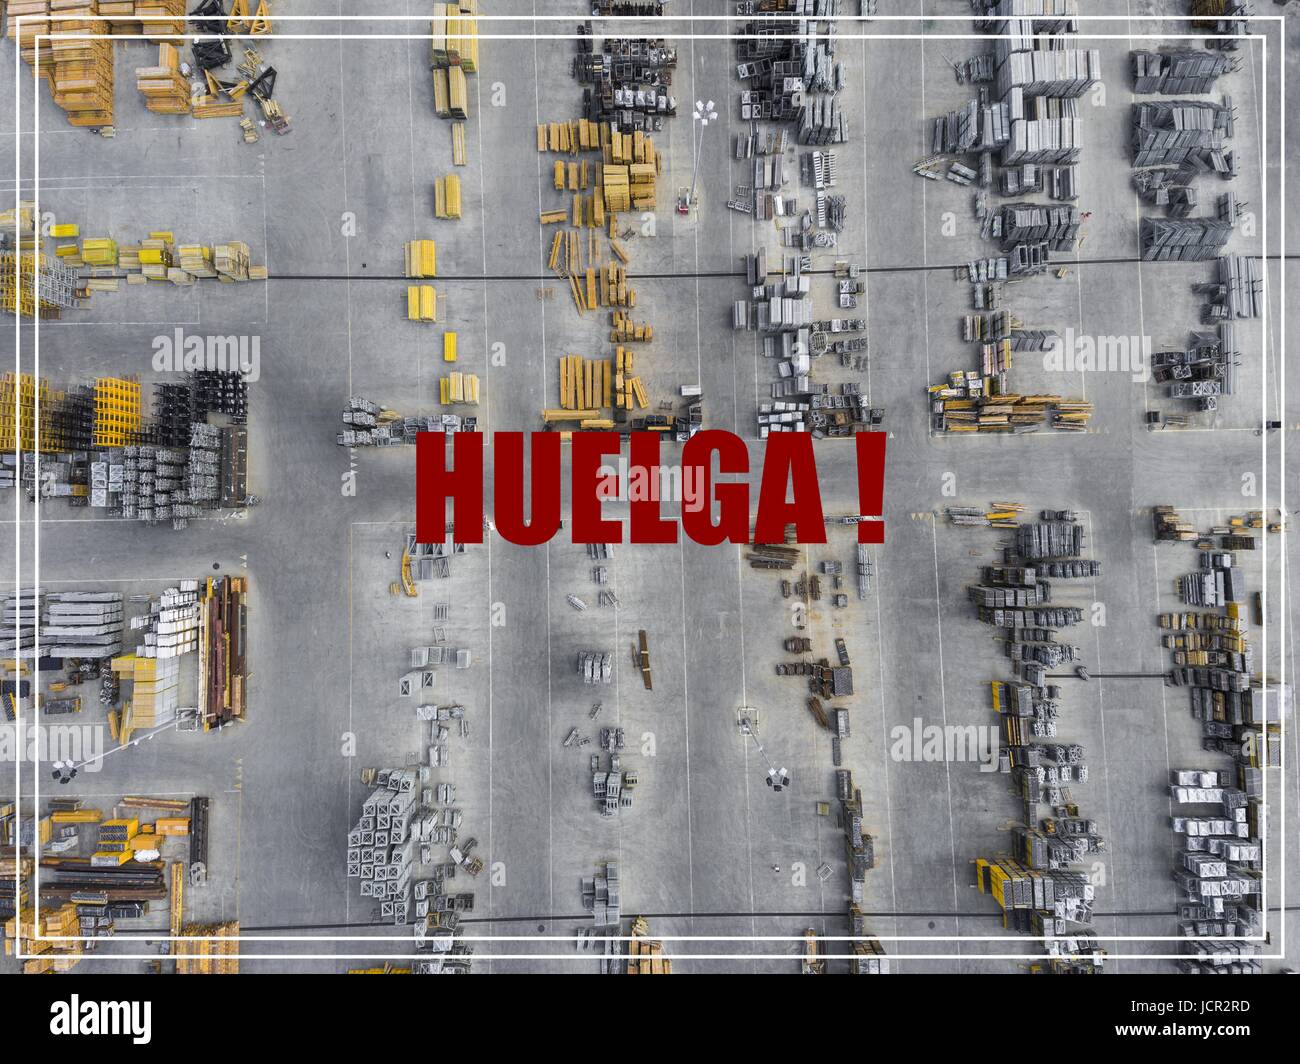 Word Huelga in spanish language. Industrial storage place, view from above. Stock Photo